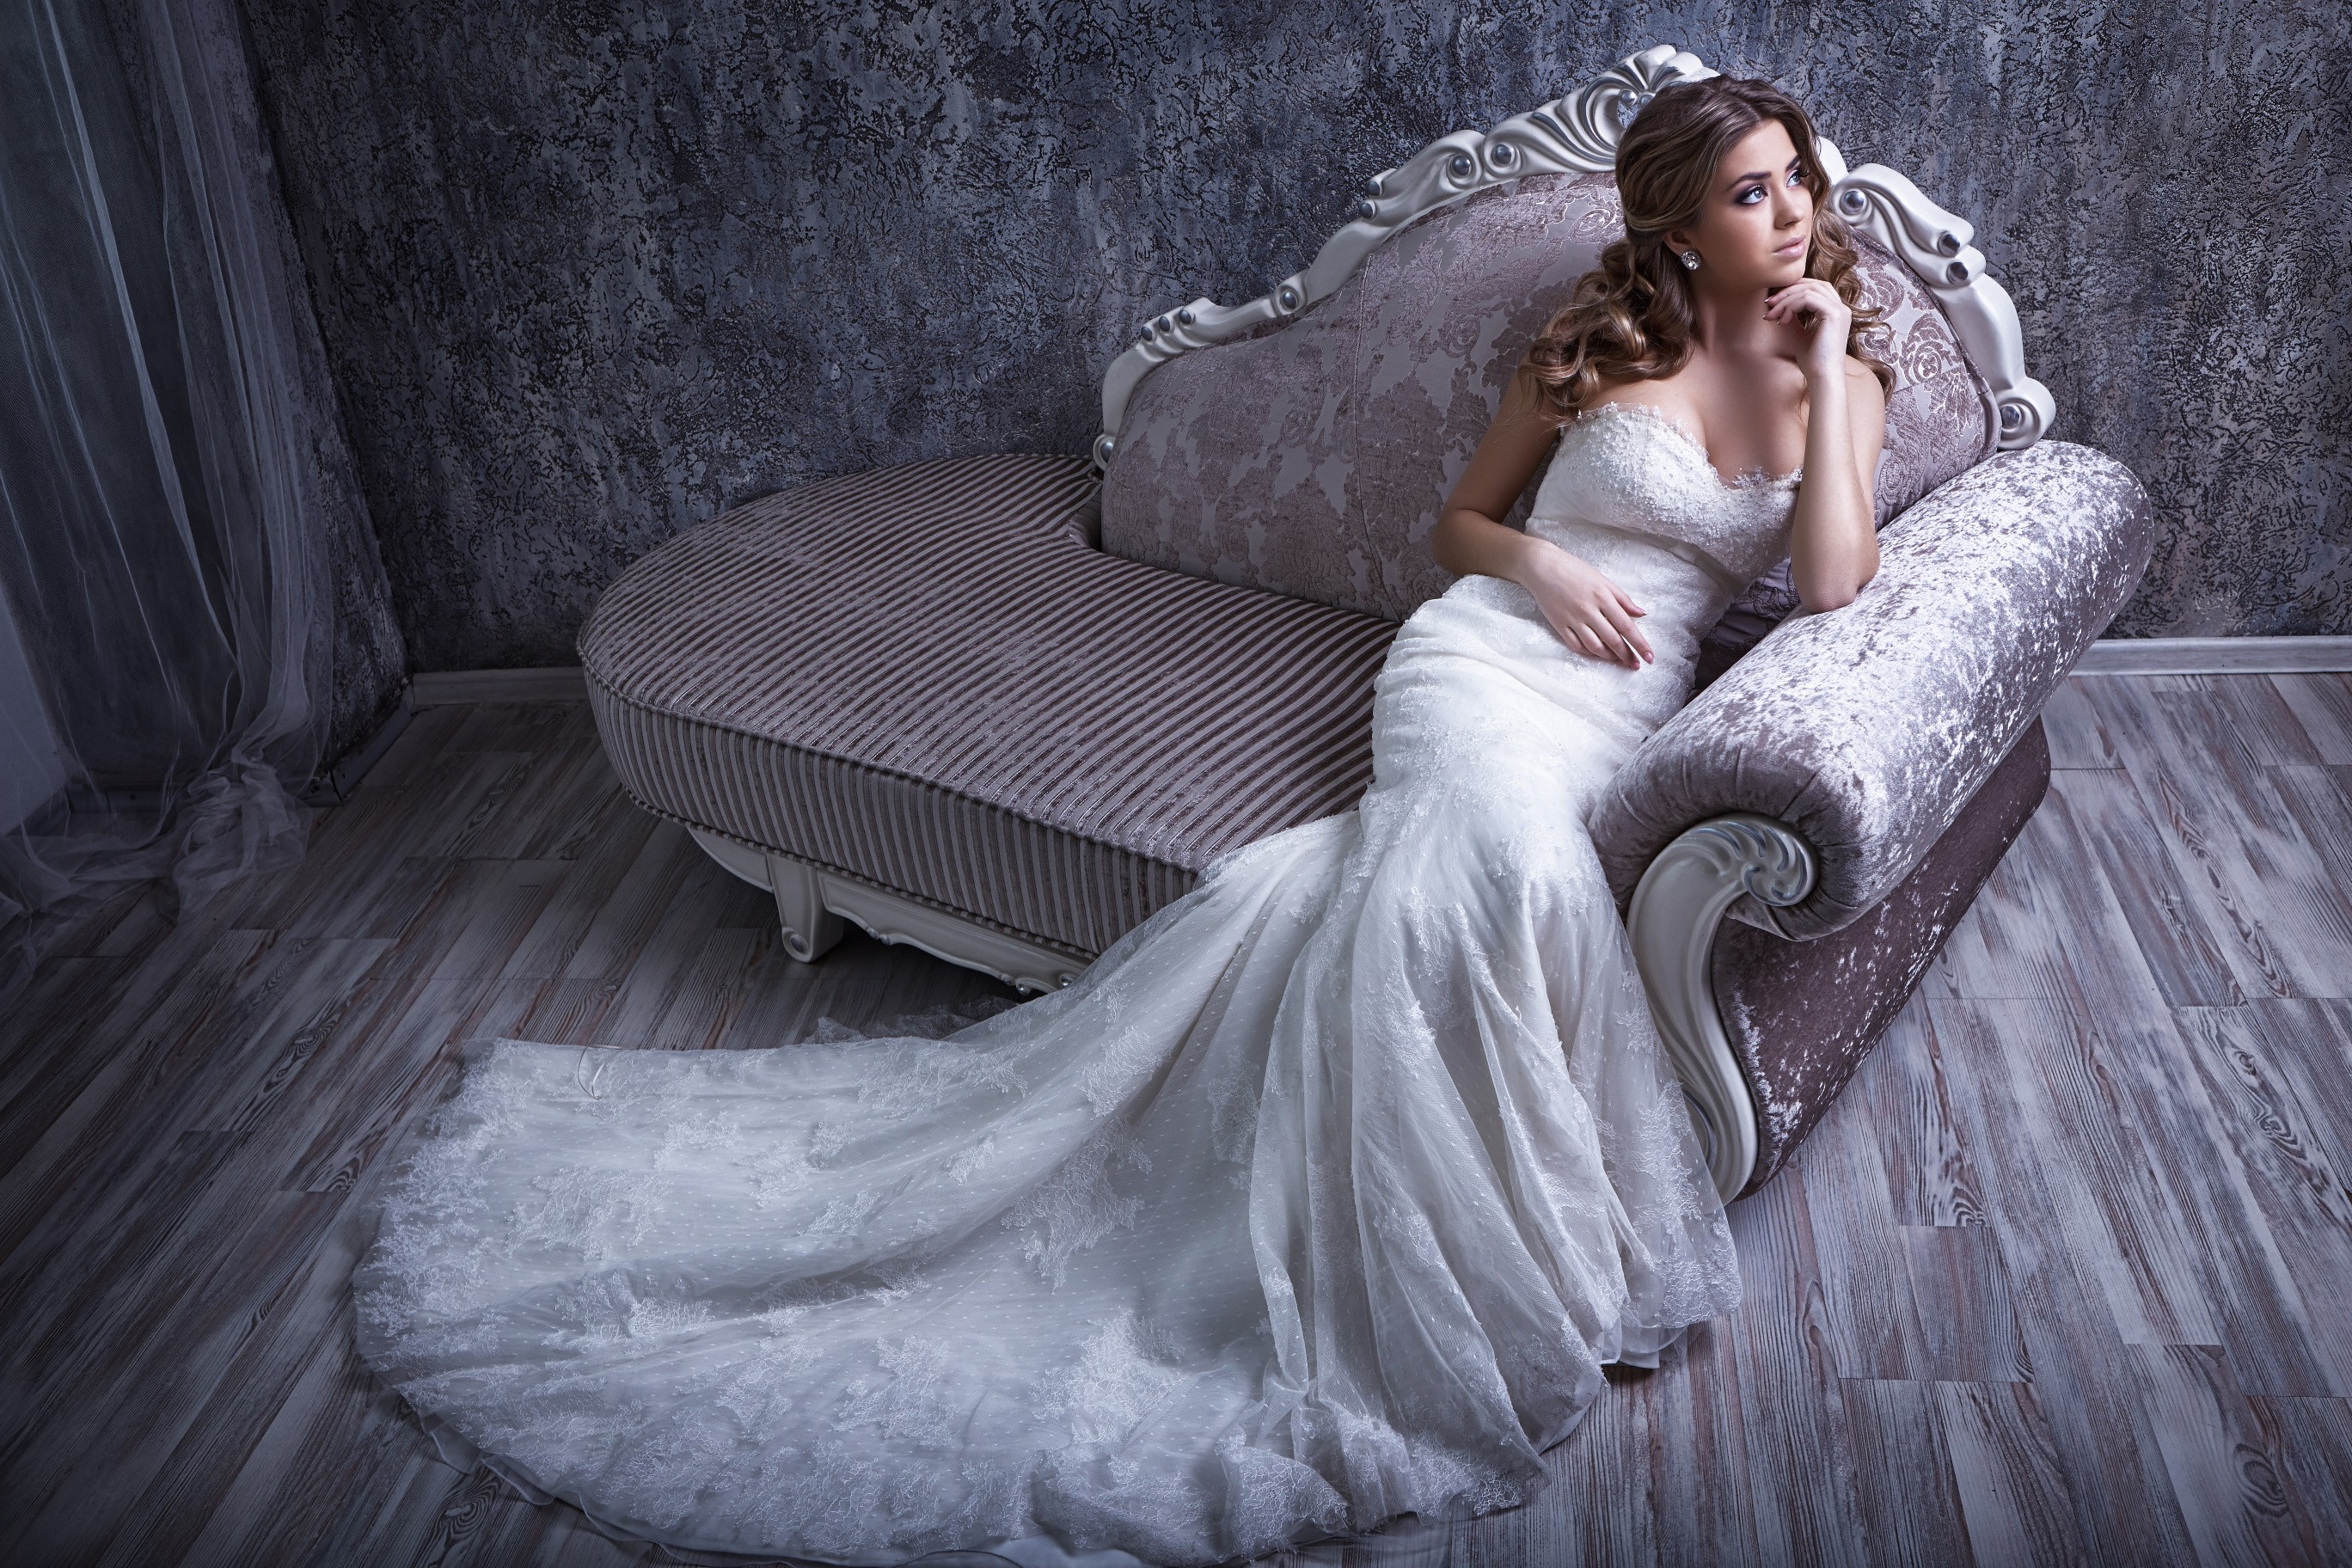 People 2736x1824 couch dress women model bridal gown women indoors indoors white dress white clothing looking away brunette makeup sitting wooden surface